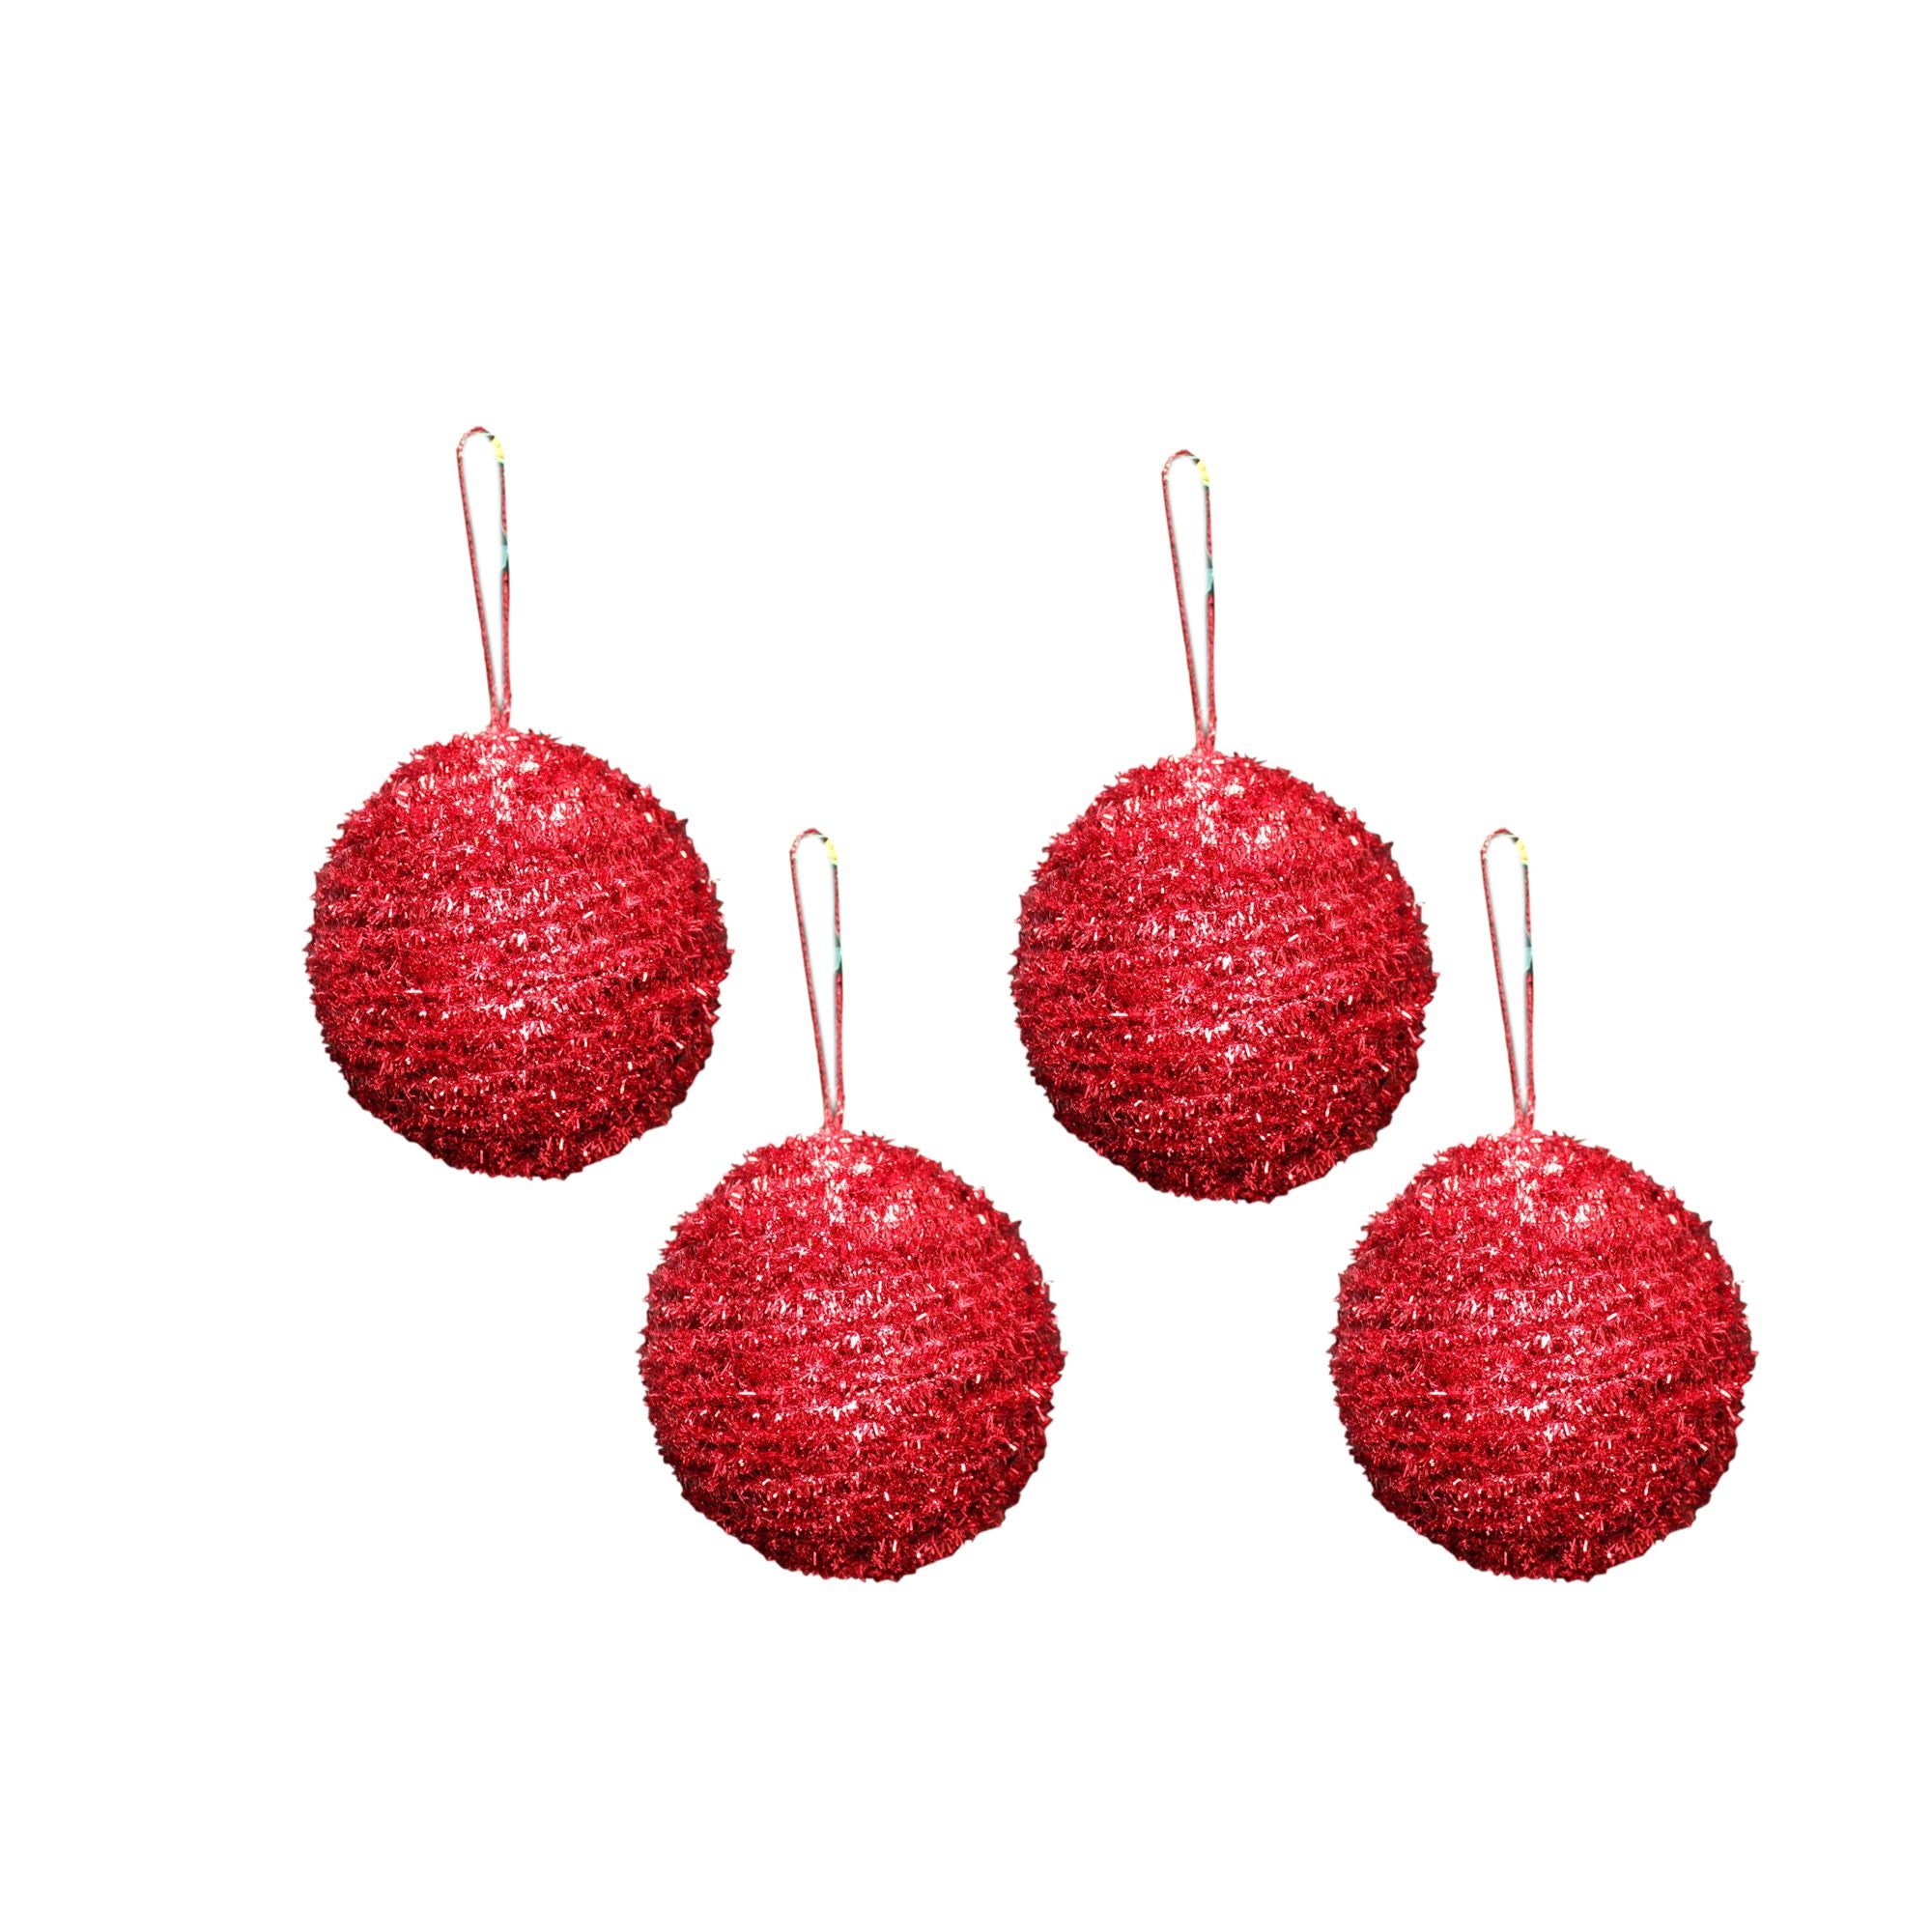 Handmade Christmas Ornaments - Tinsel Baubles, 60mm, Red, 4pc